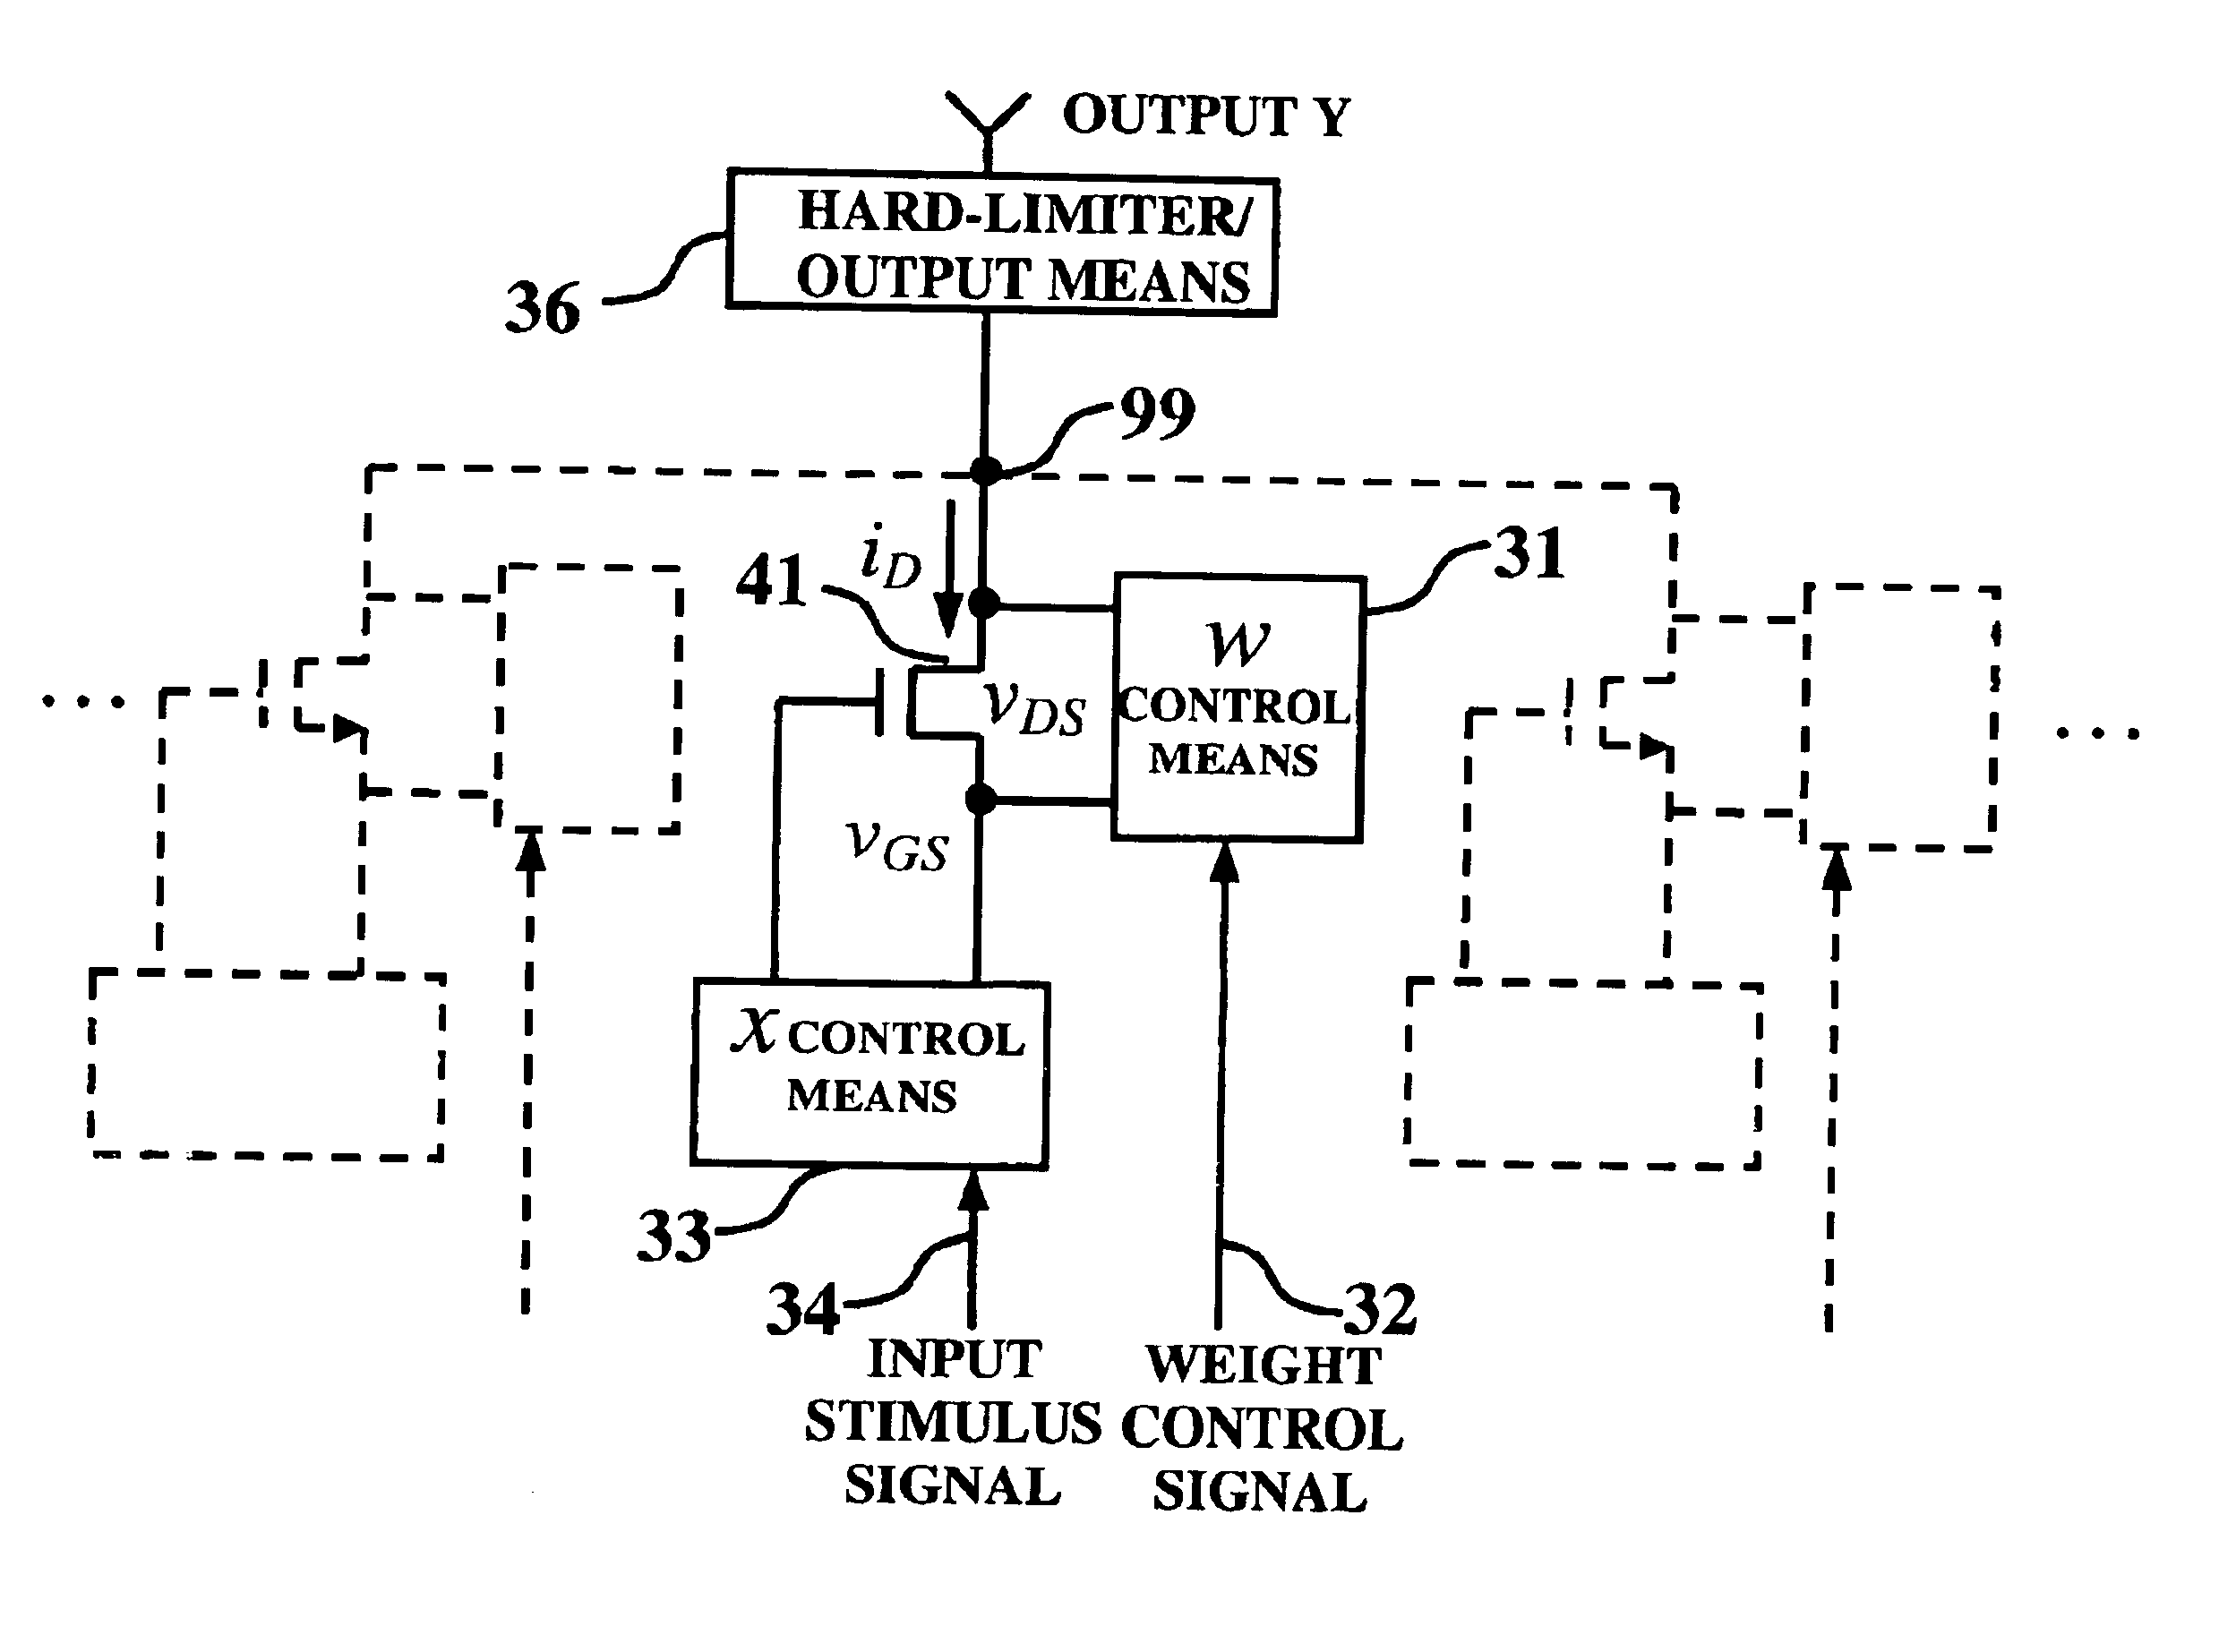 Method and apparatus for modeling a neural synapse function by utilizing a single conventional MOSFET